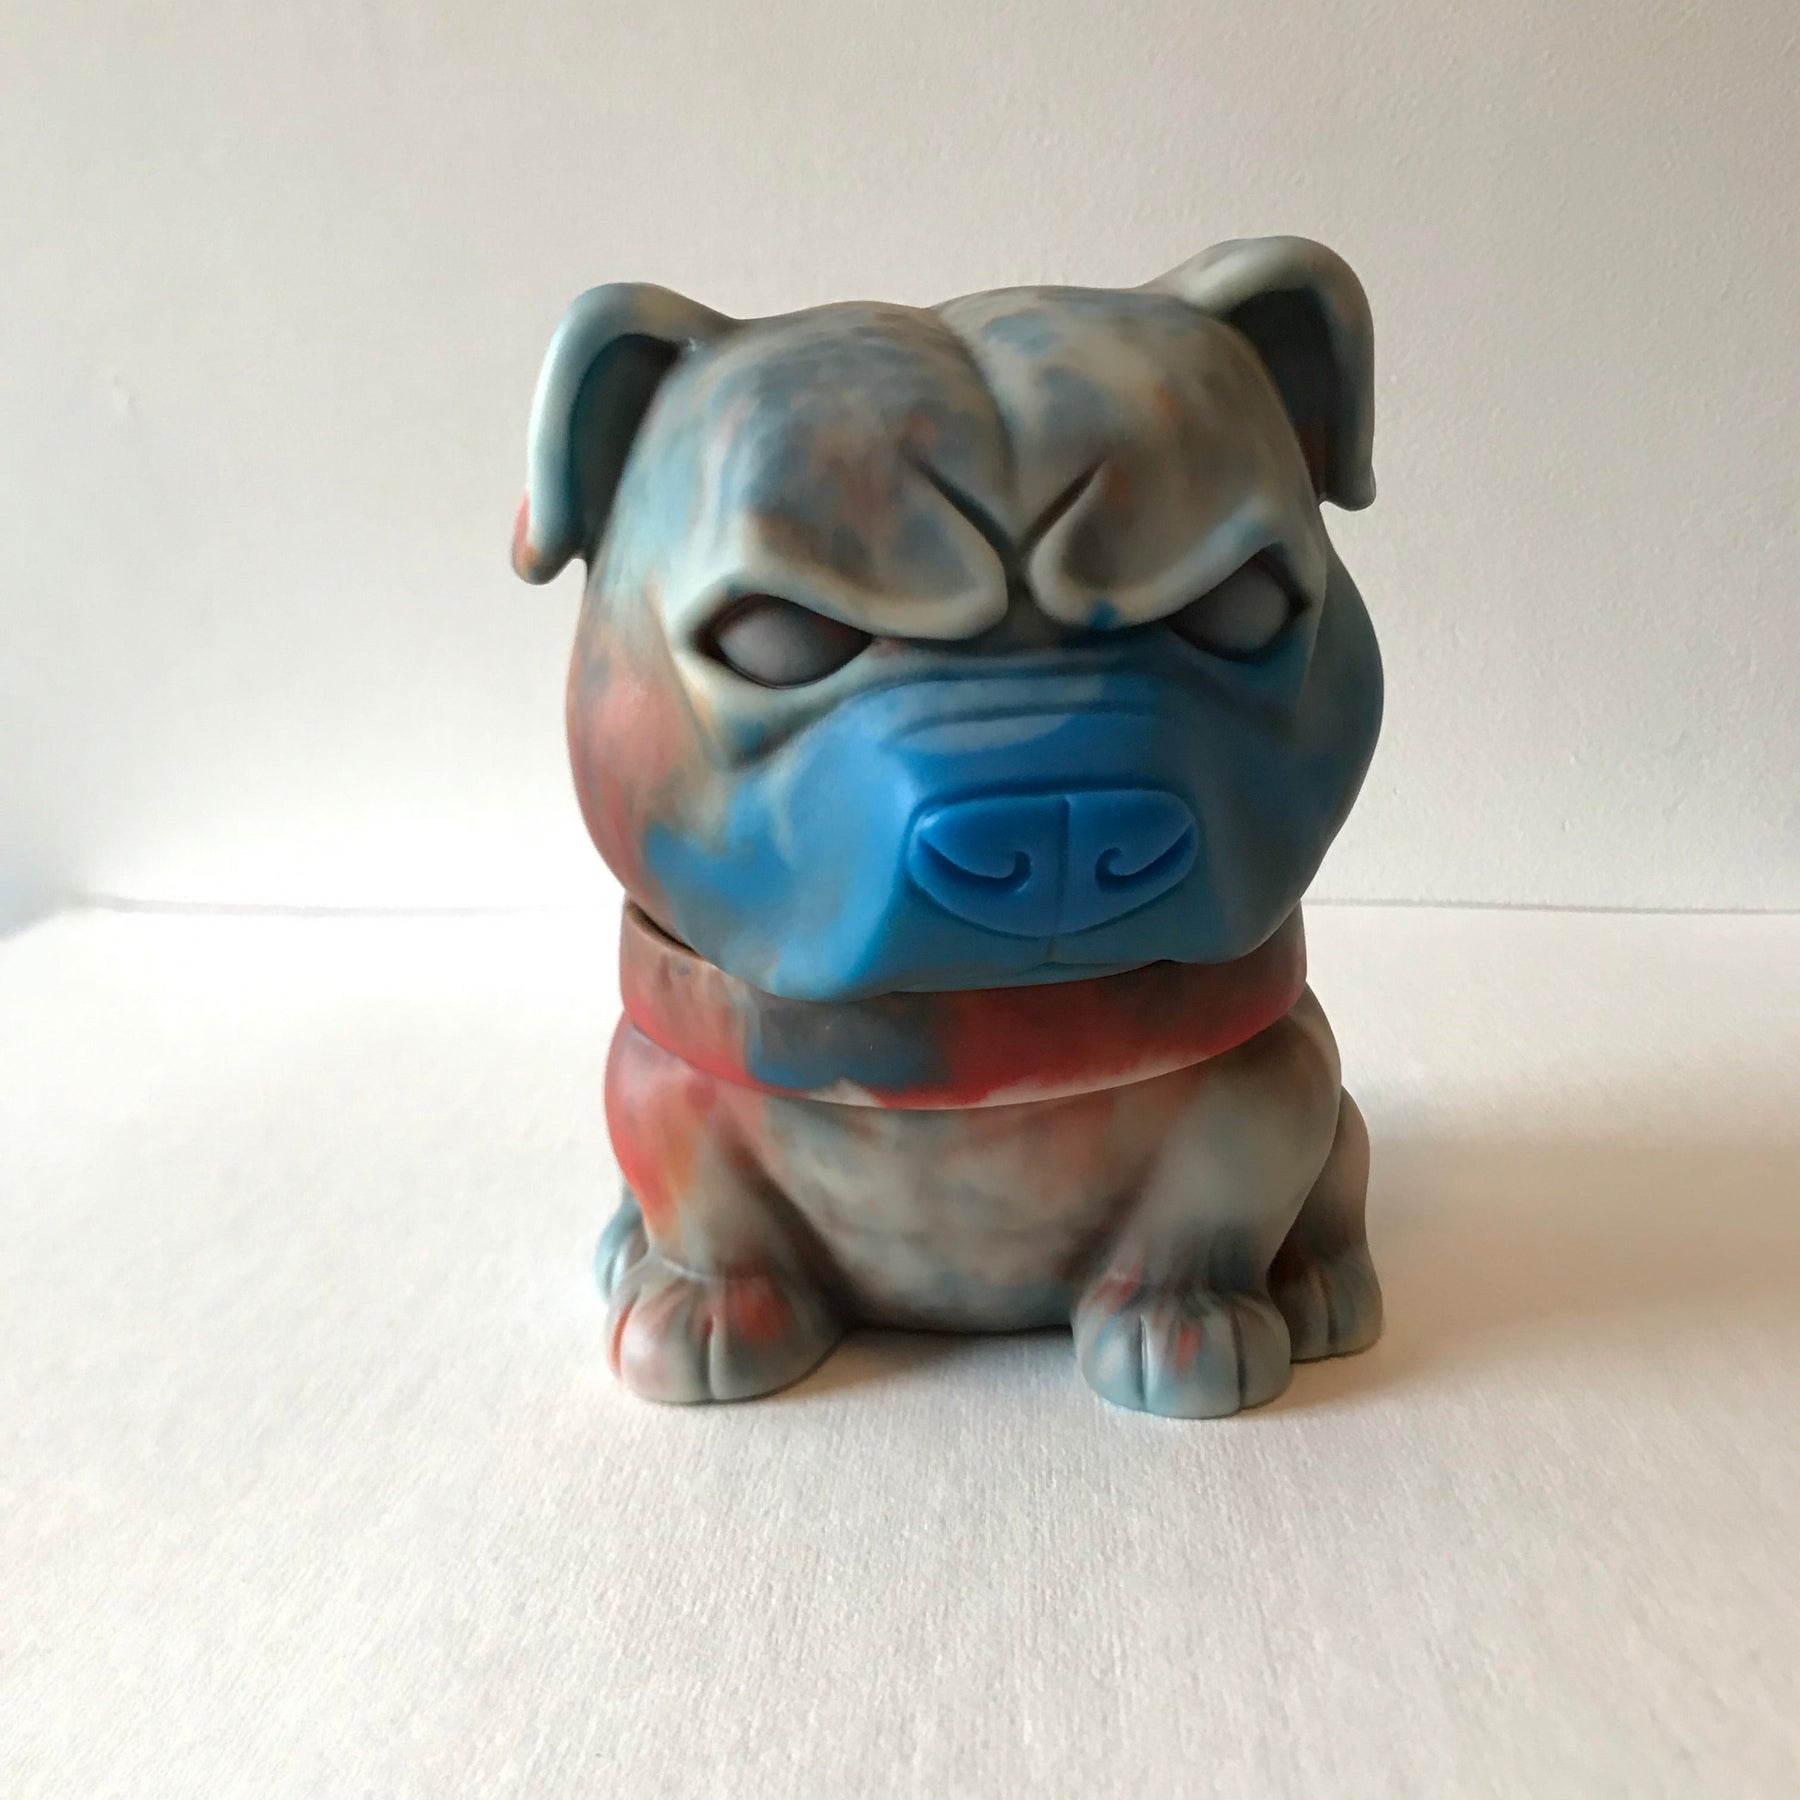 Danger Dog Red White & Blue vinyl 5-inch figure Available Now